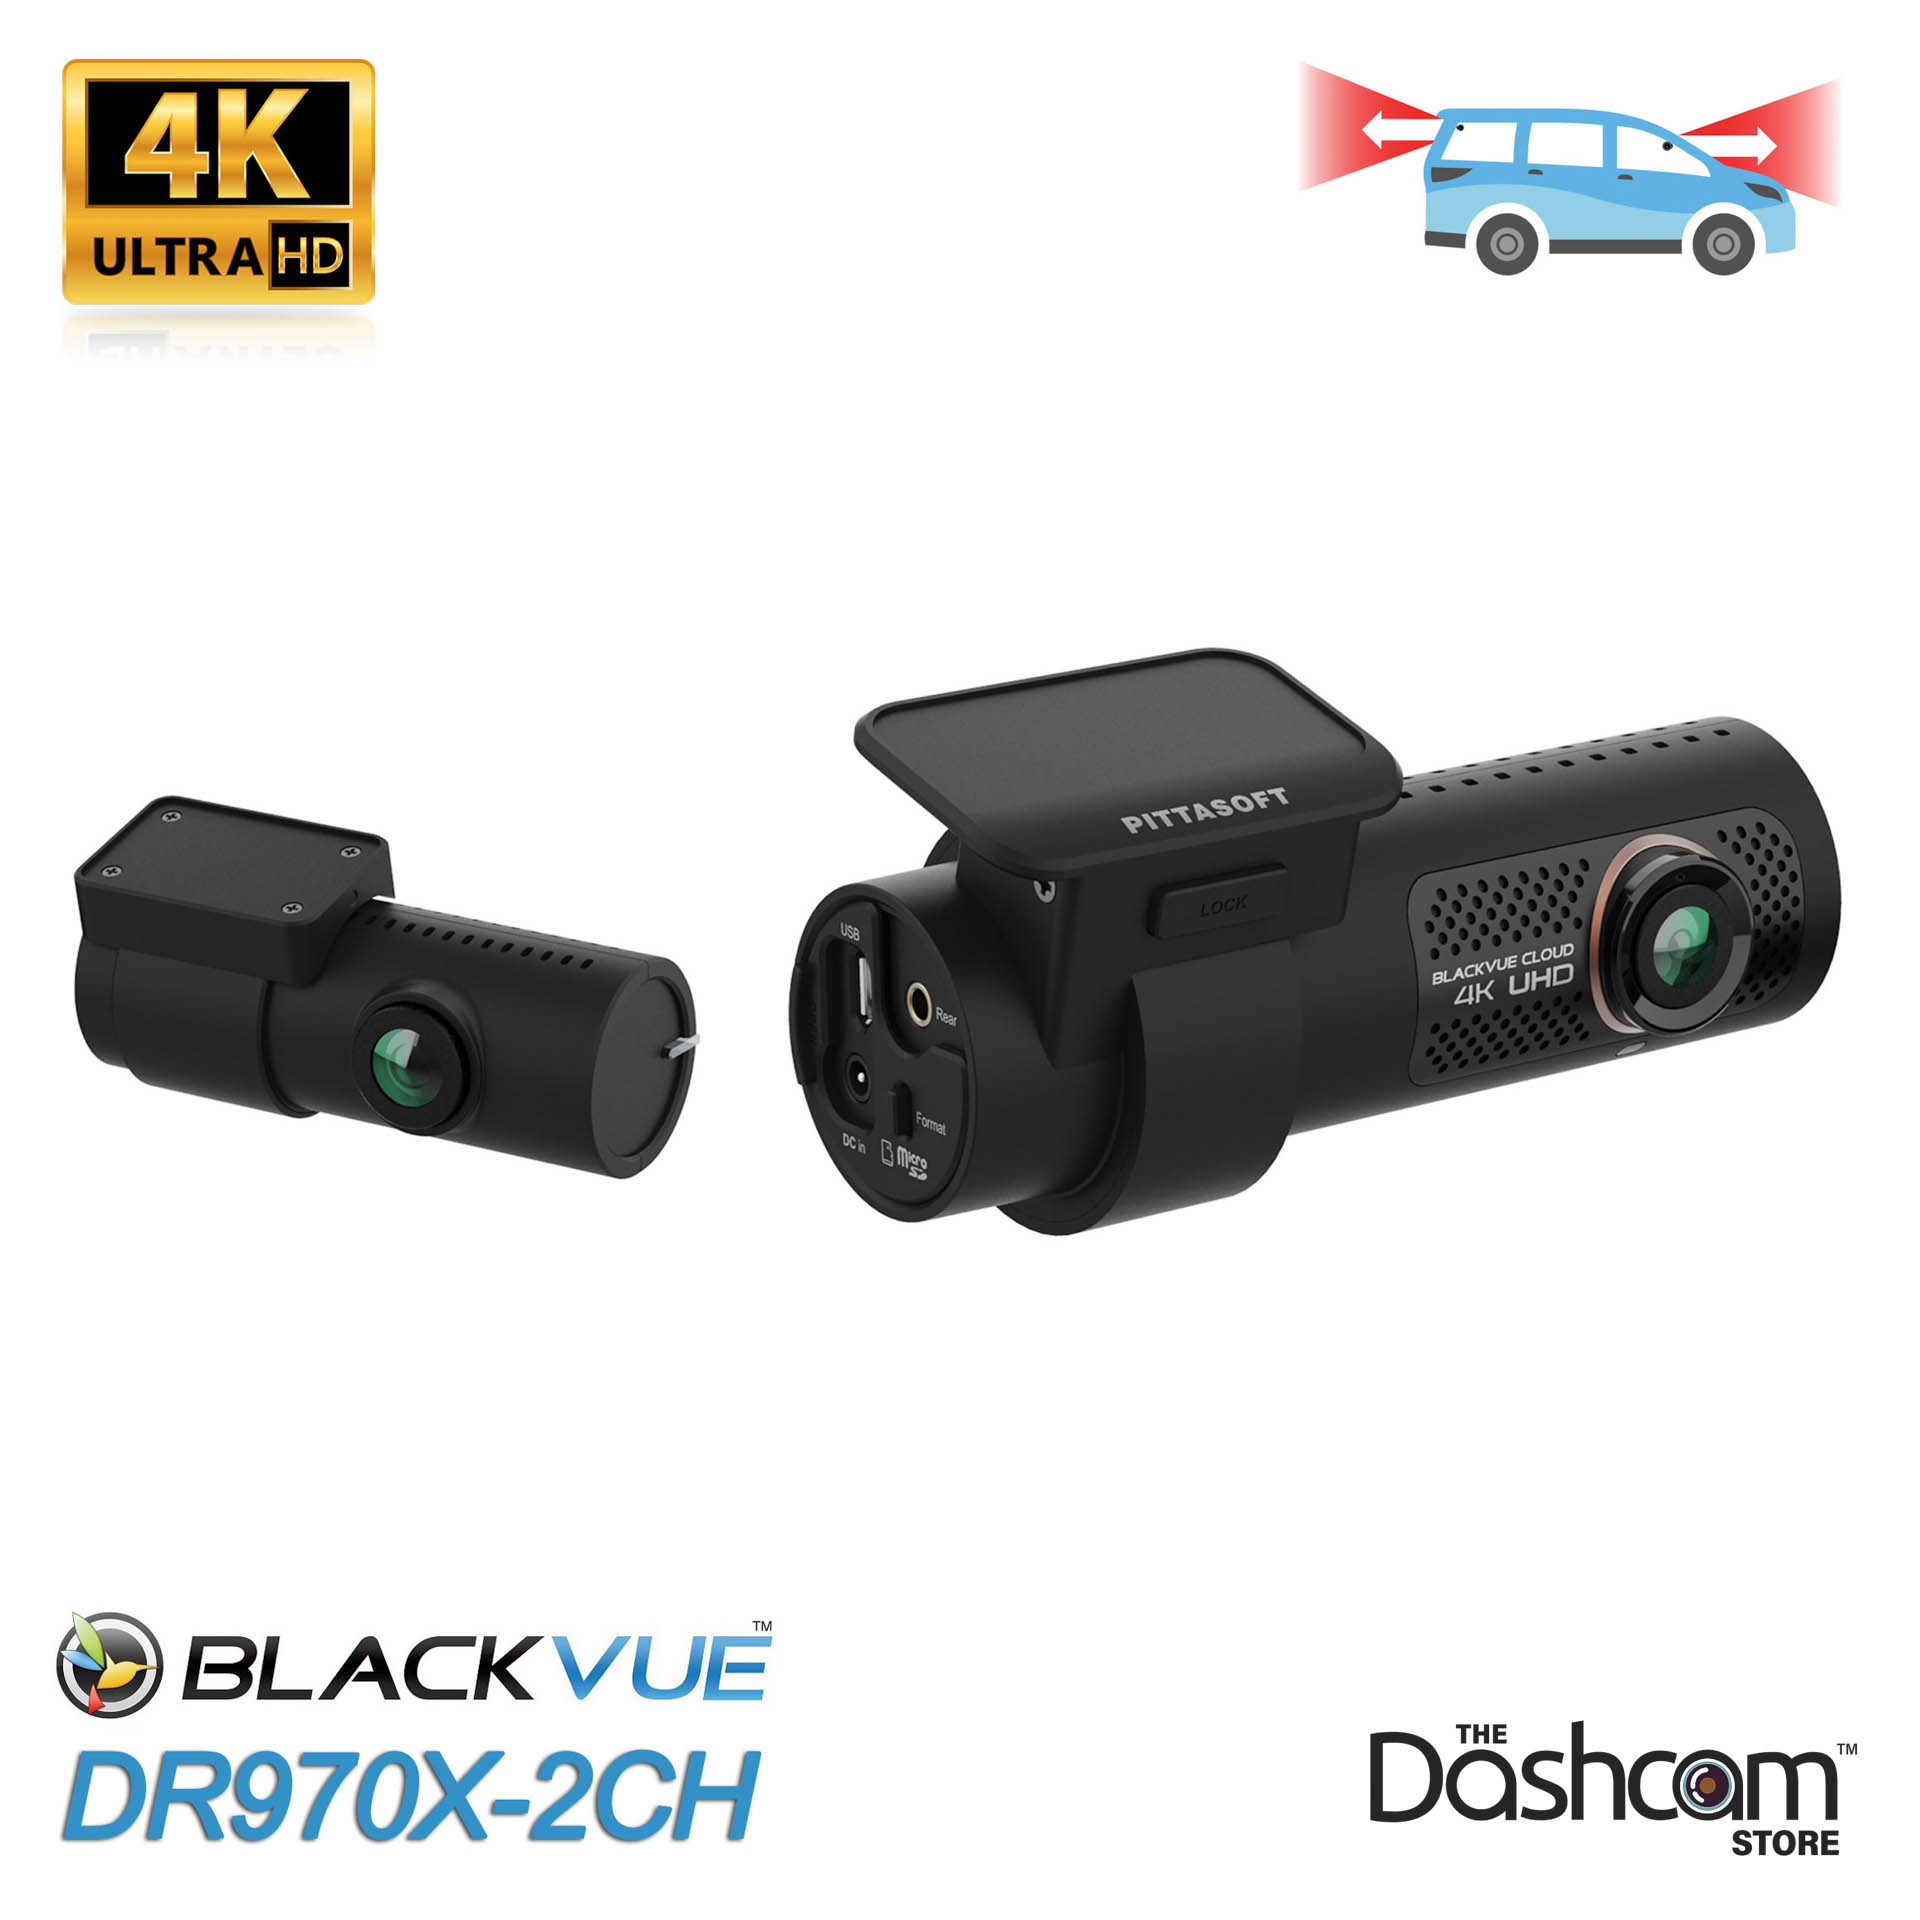 s First Ring Dashcam Rocks Dual-Facing HD Cameras And Night